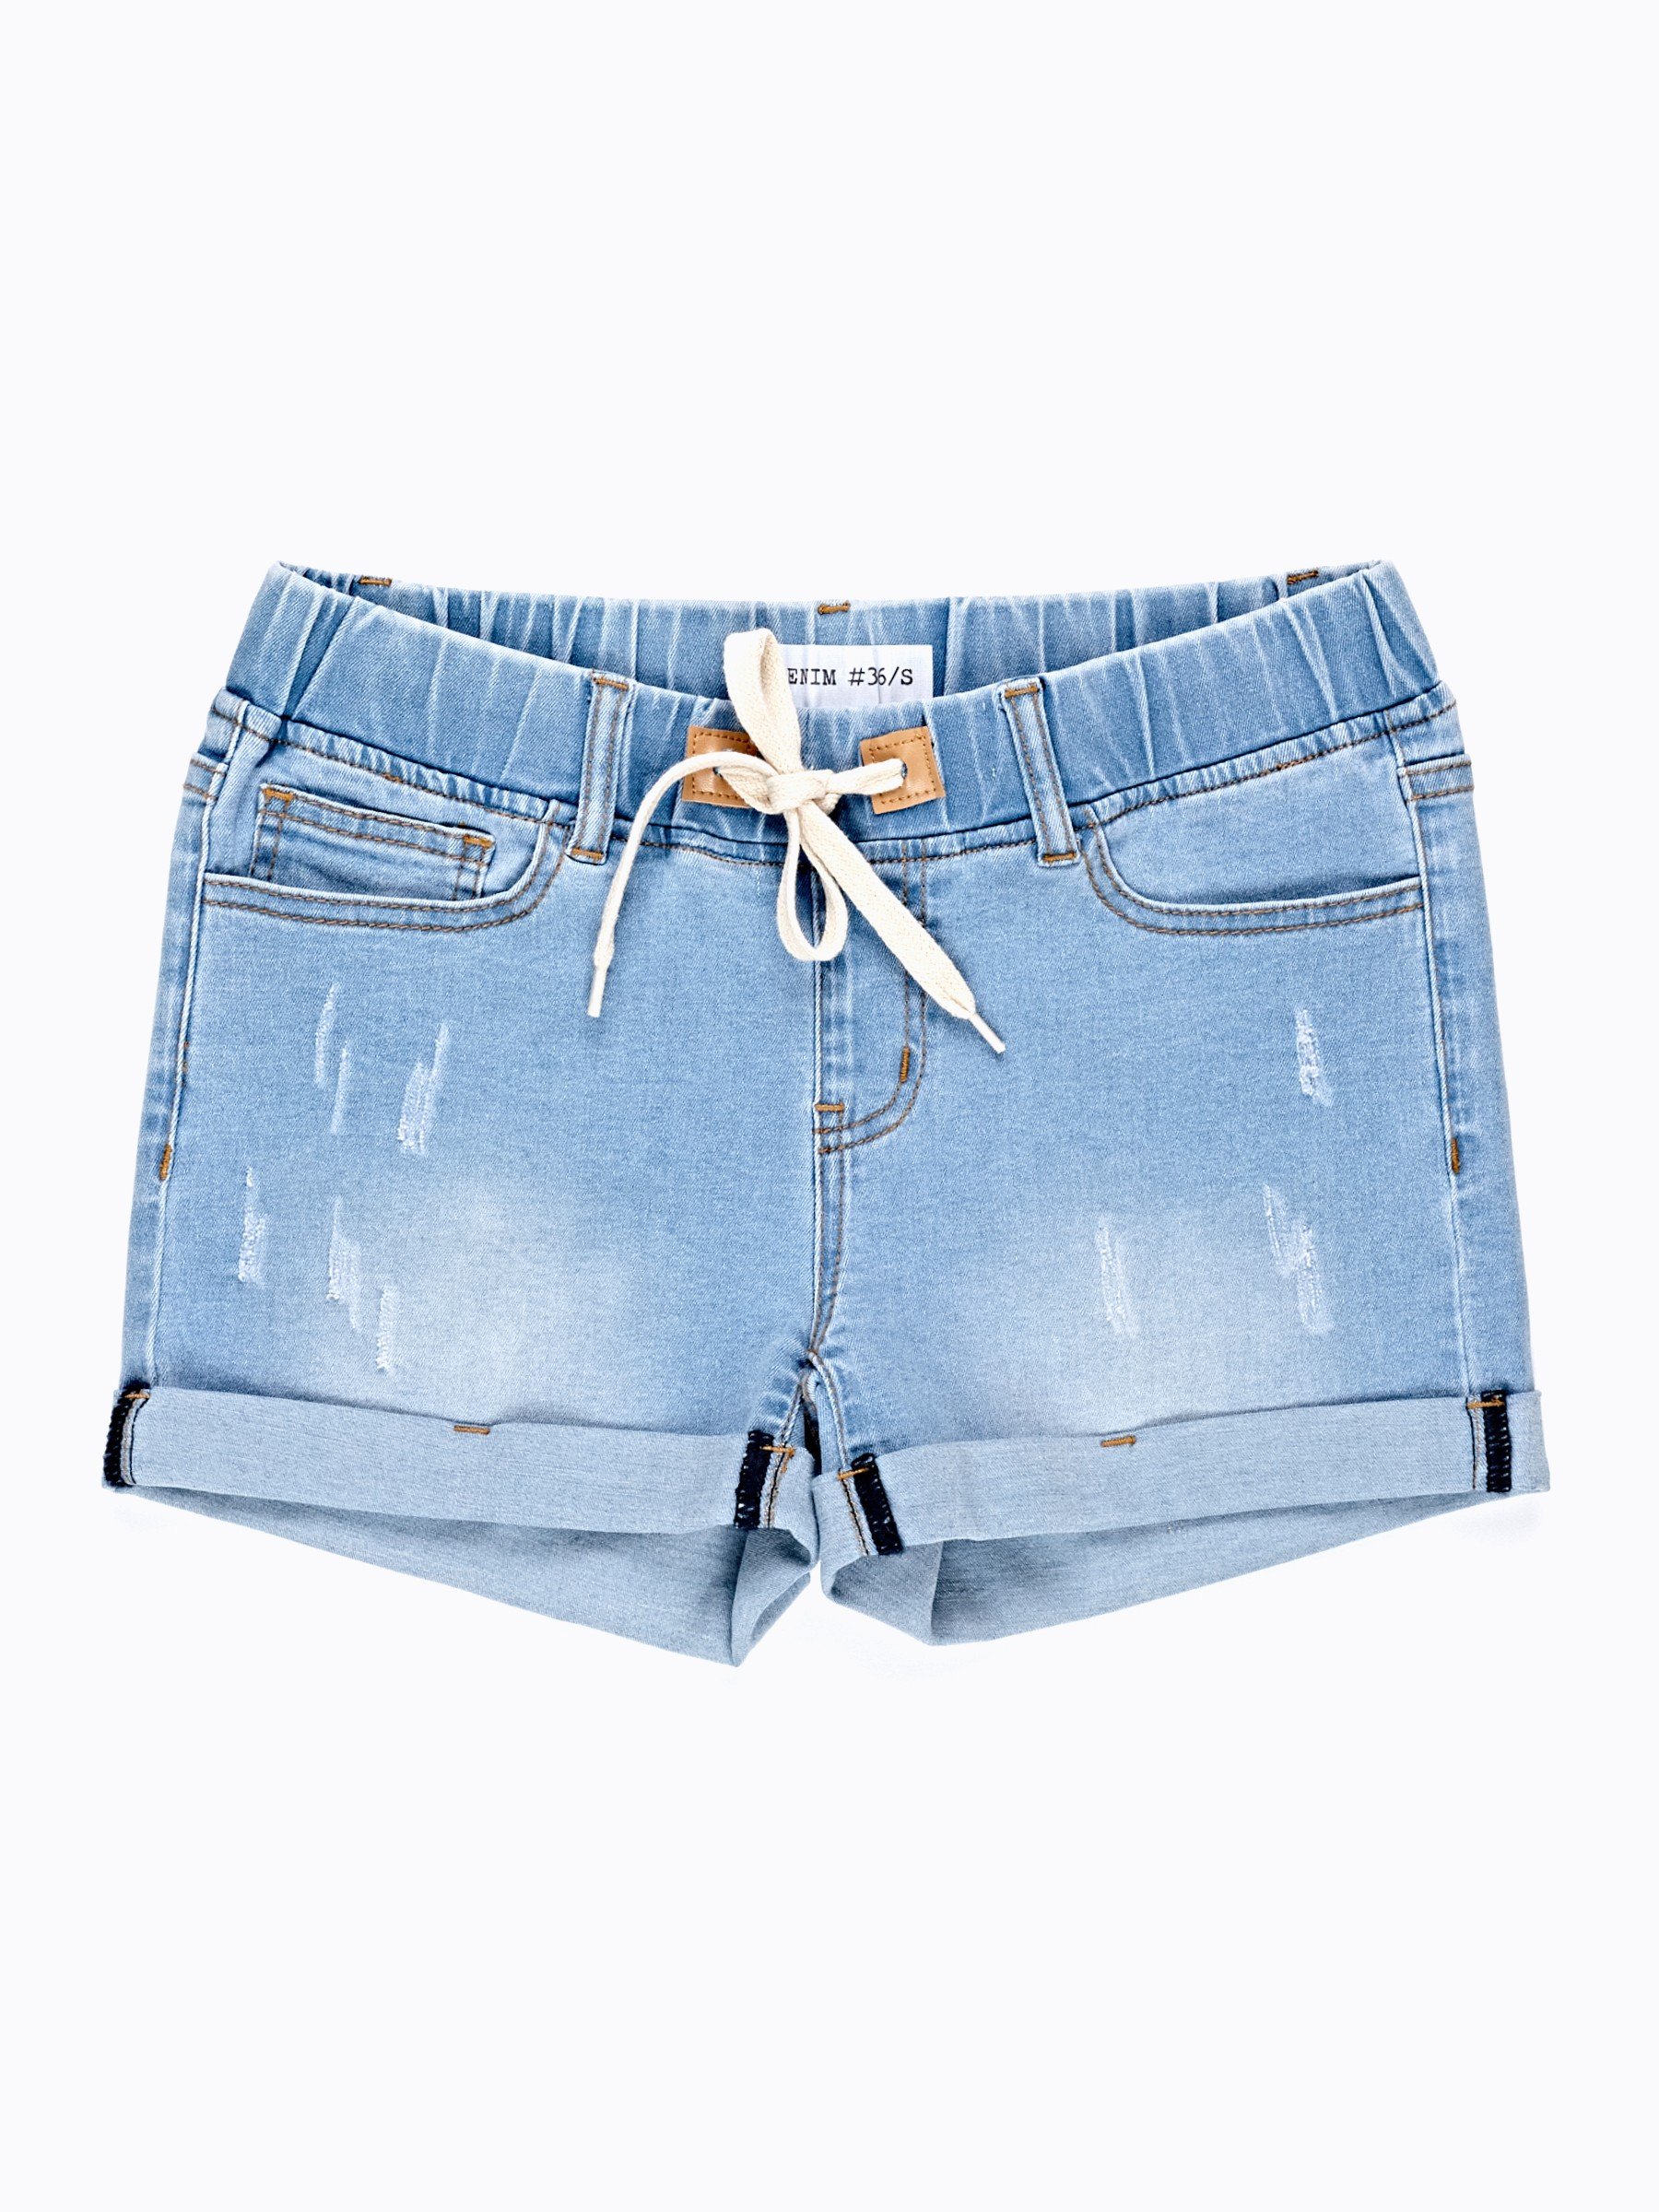 jean shorts with strings